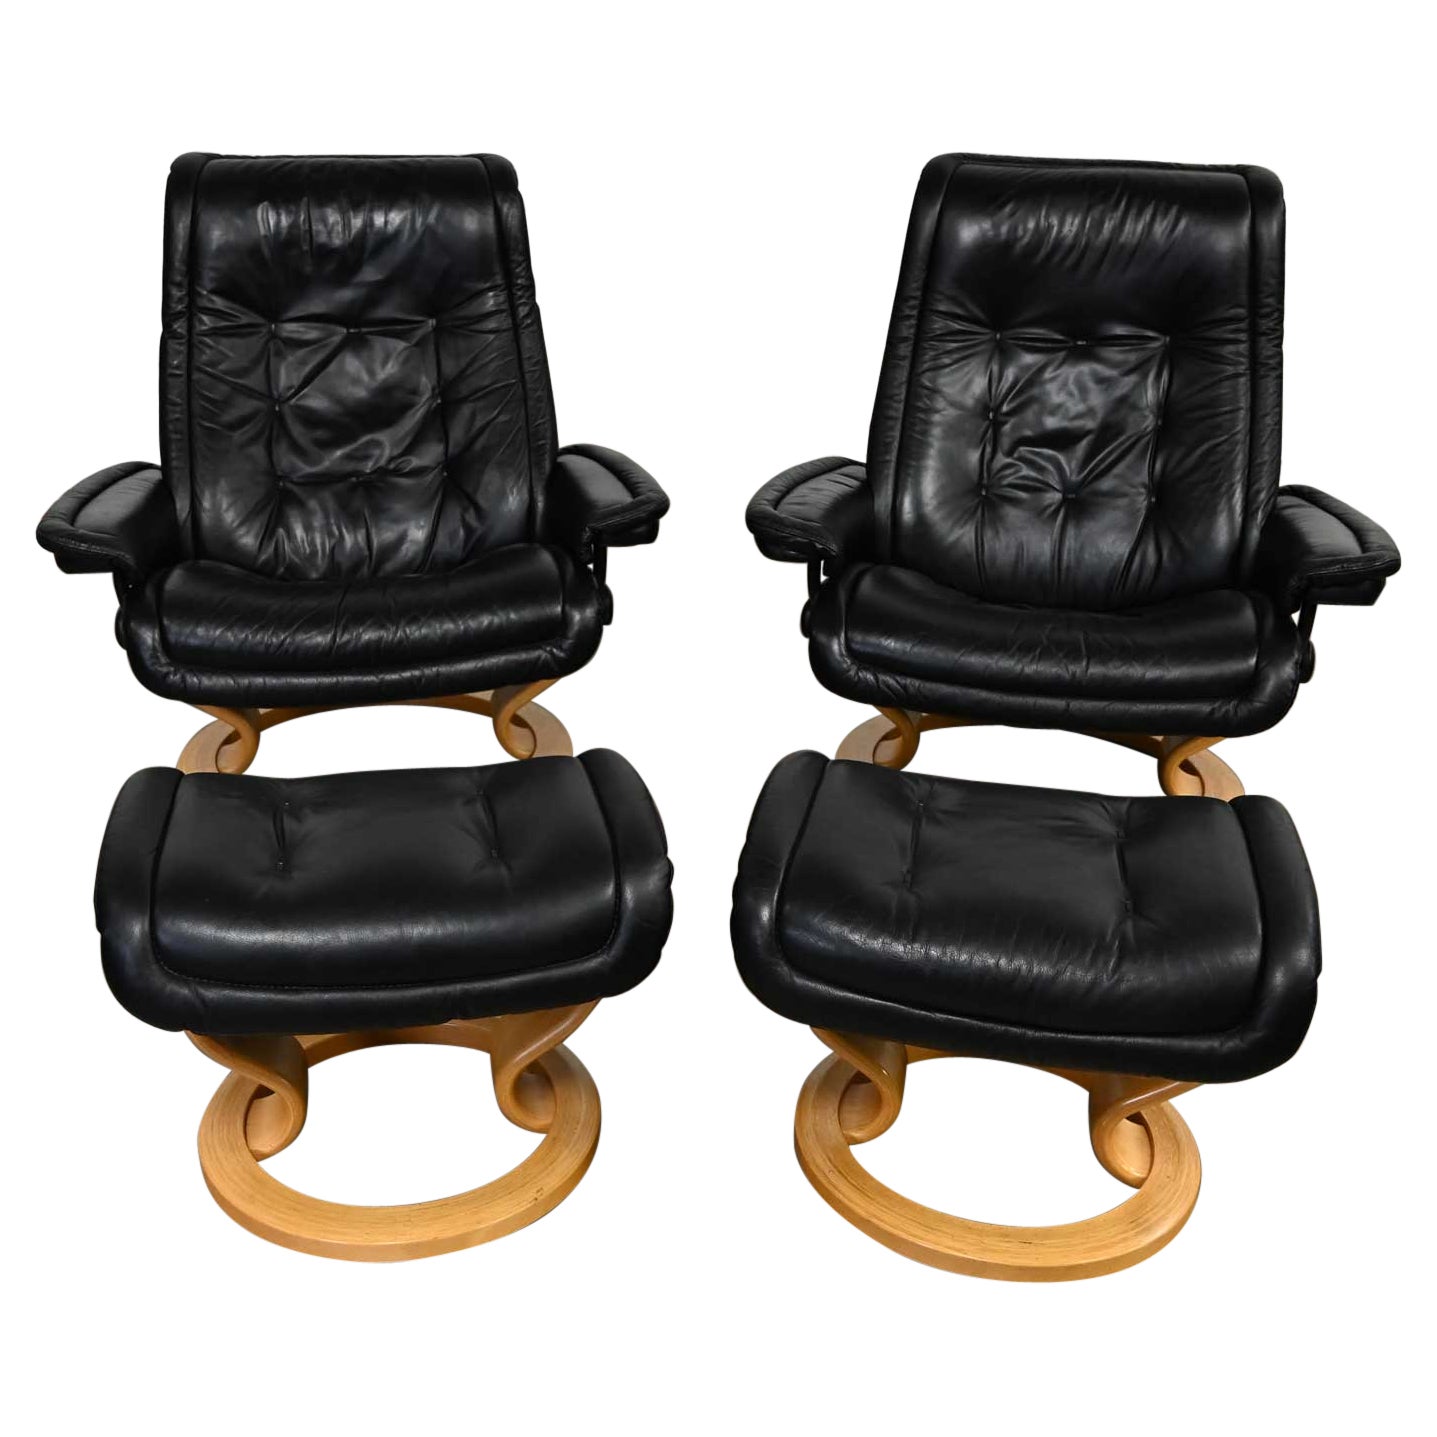 Pair Ekornes Stressless Royal Recliner Black Leather Lounge Chairs & Ottomans For Sale